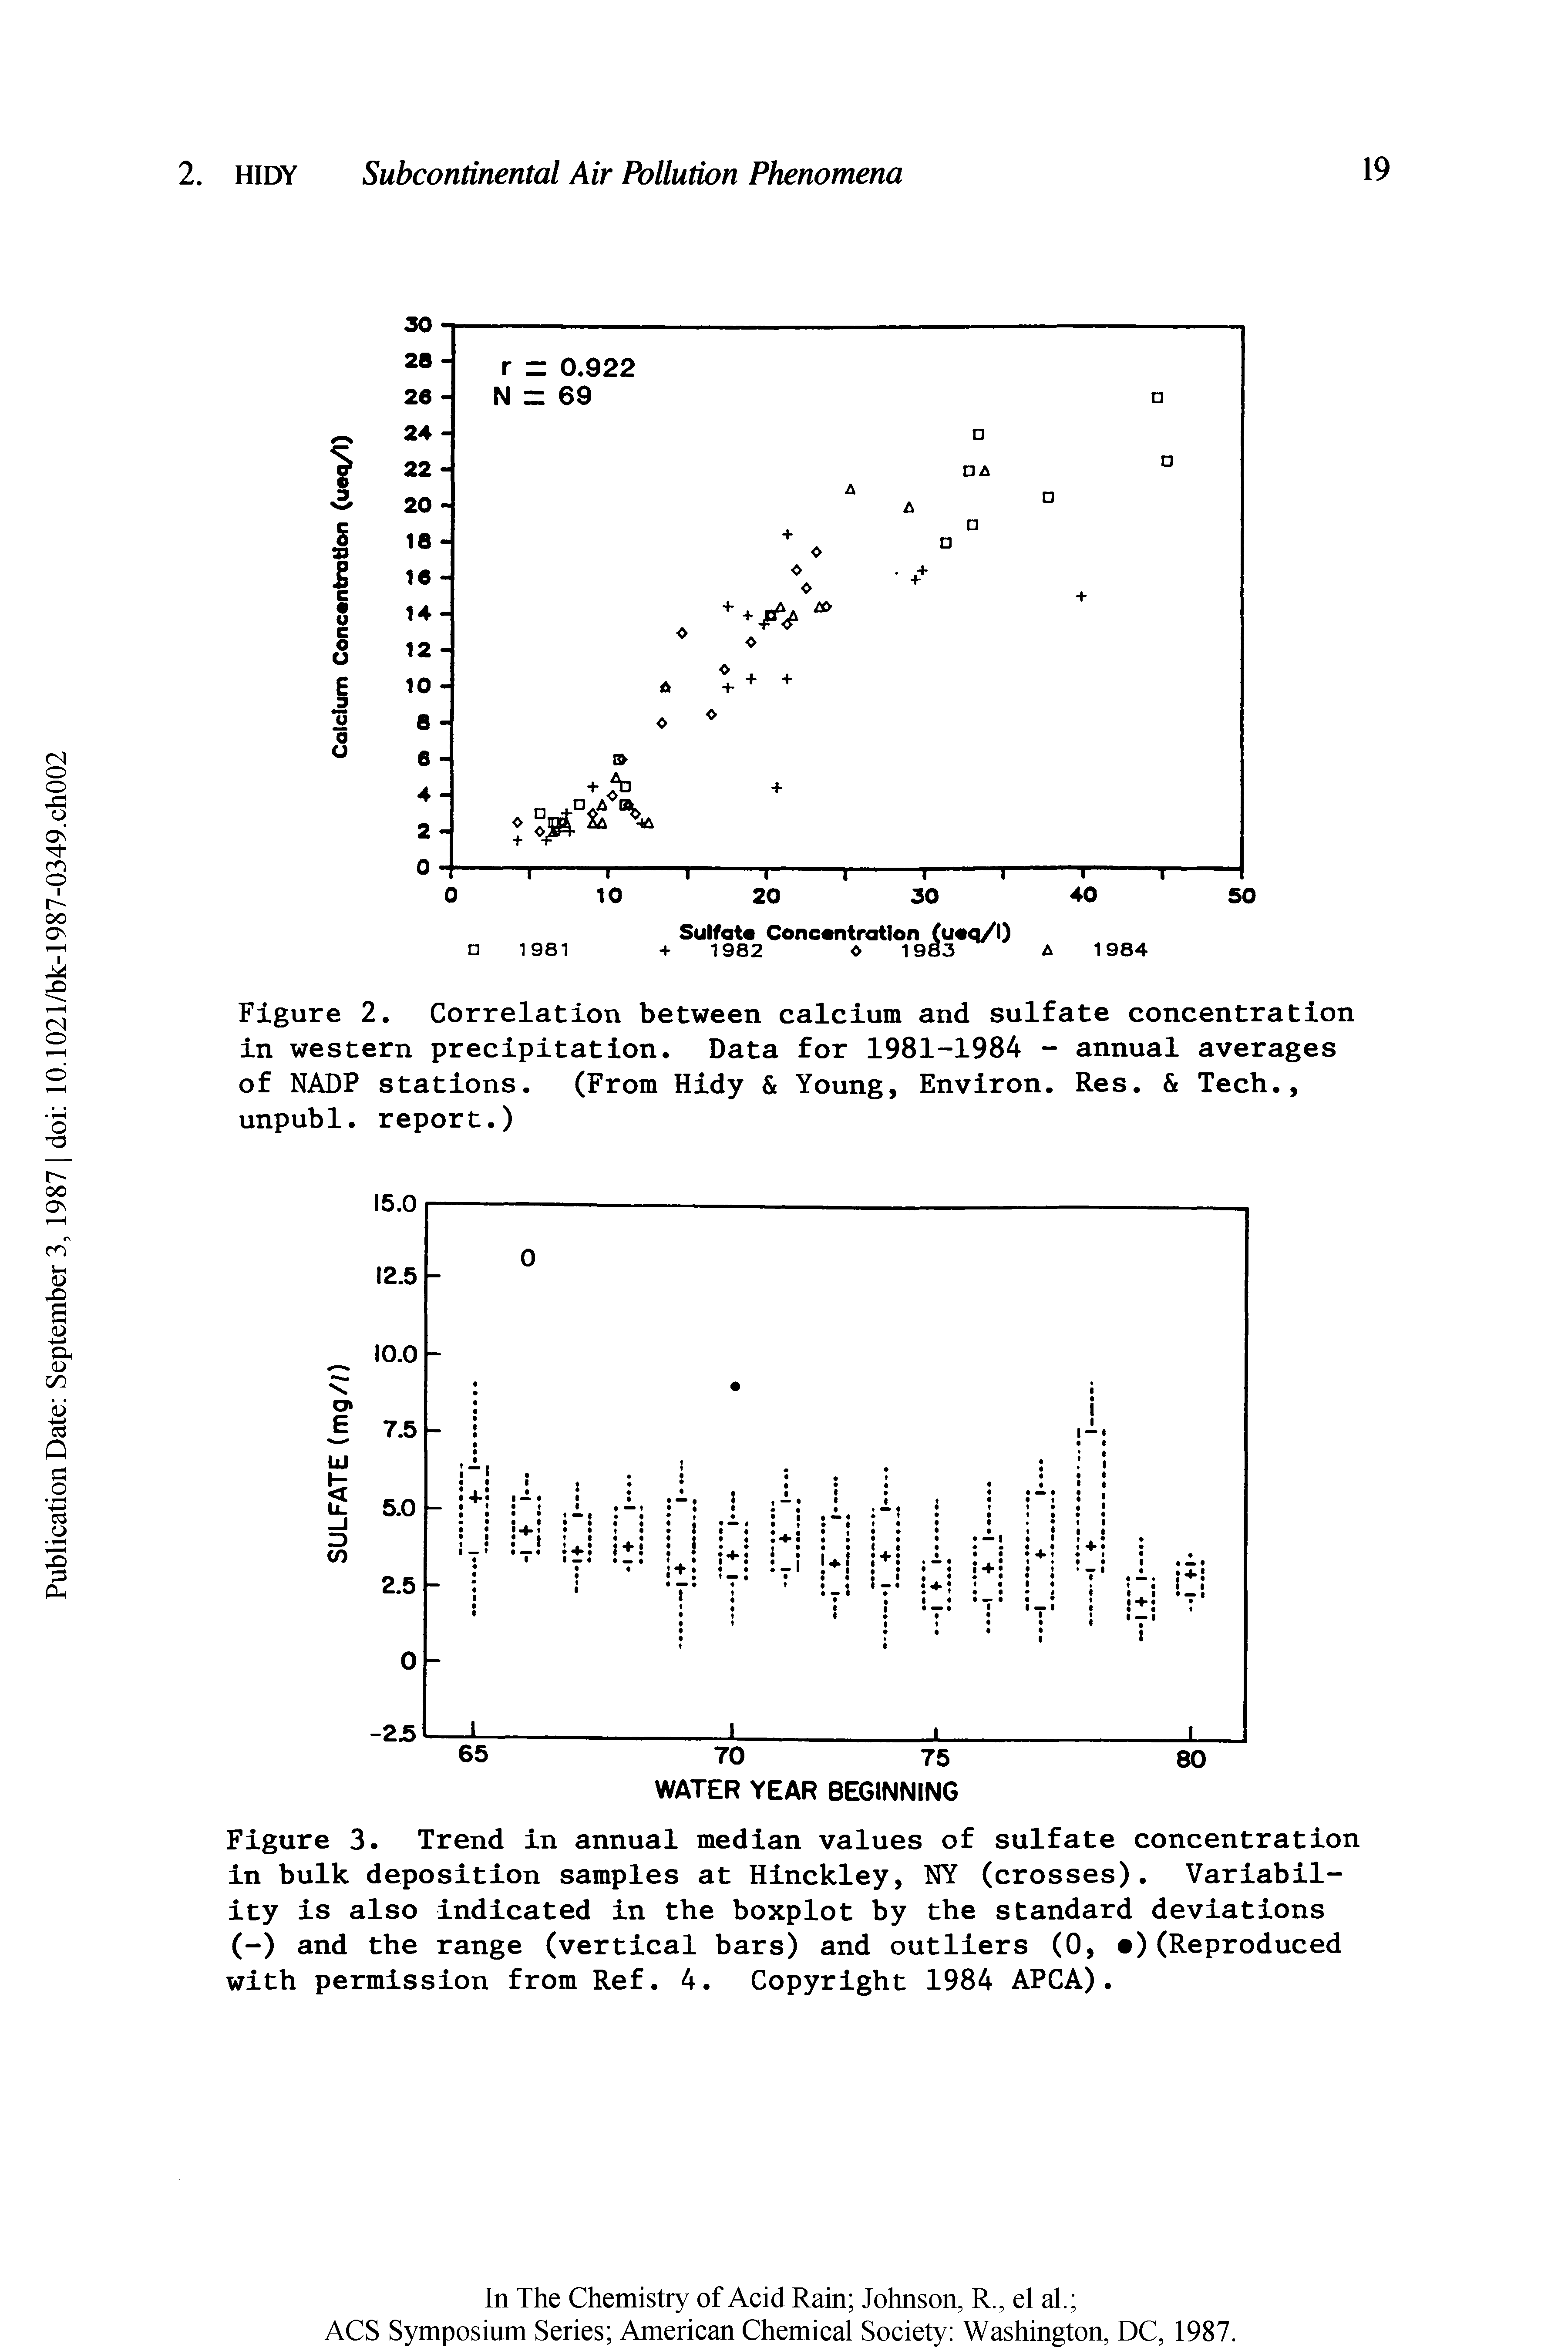 Figure 2. Correlation between calcium and sulfate concentration in western precipitation. Data for 1981-1984 - annual averages of NADP stations. (From Hidy Young, Environ. Res. Tech., unpubl. report.)...